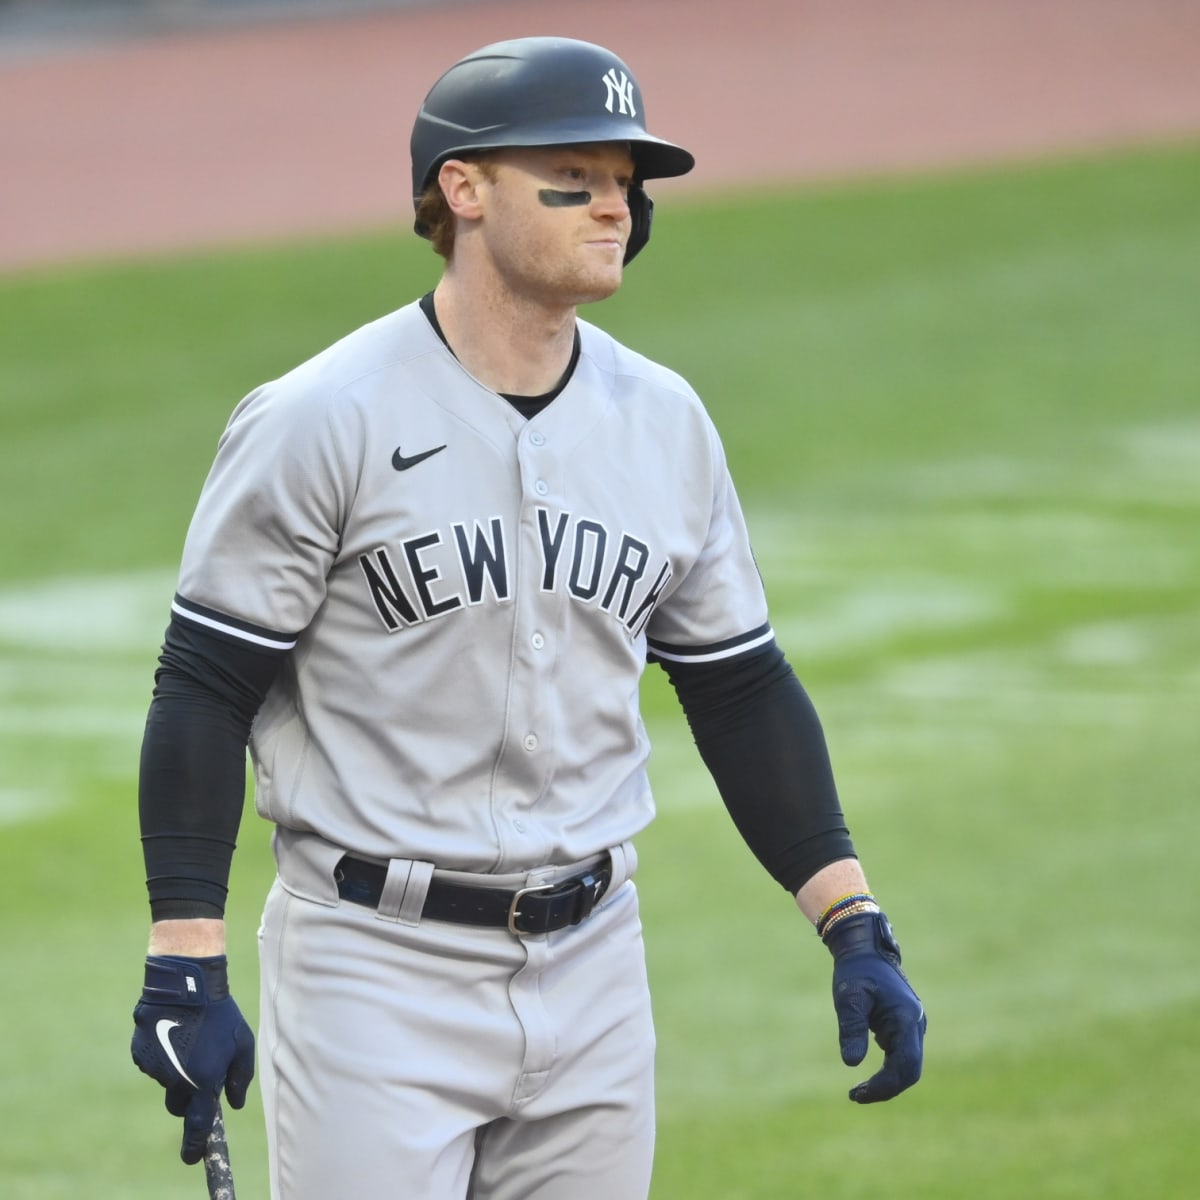 The education of New York Yankees prospect Clint Frazier - ESPN